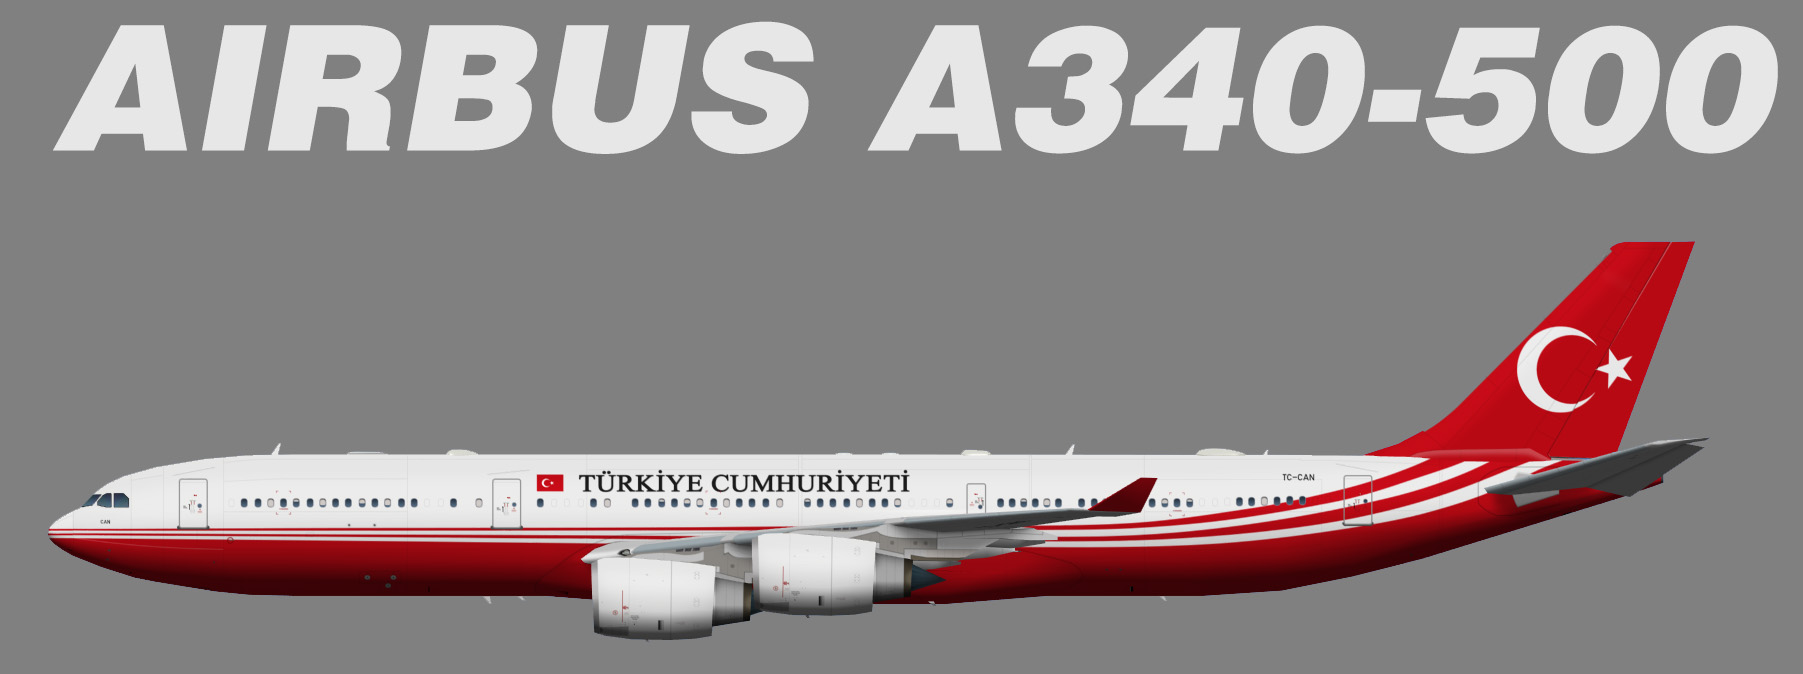 Turkish Government Airbus A340-500 (TFS)